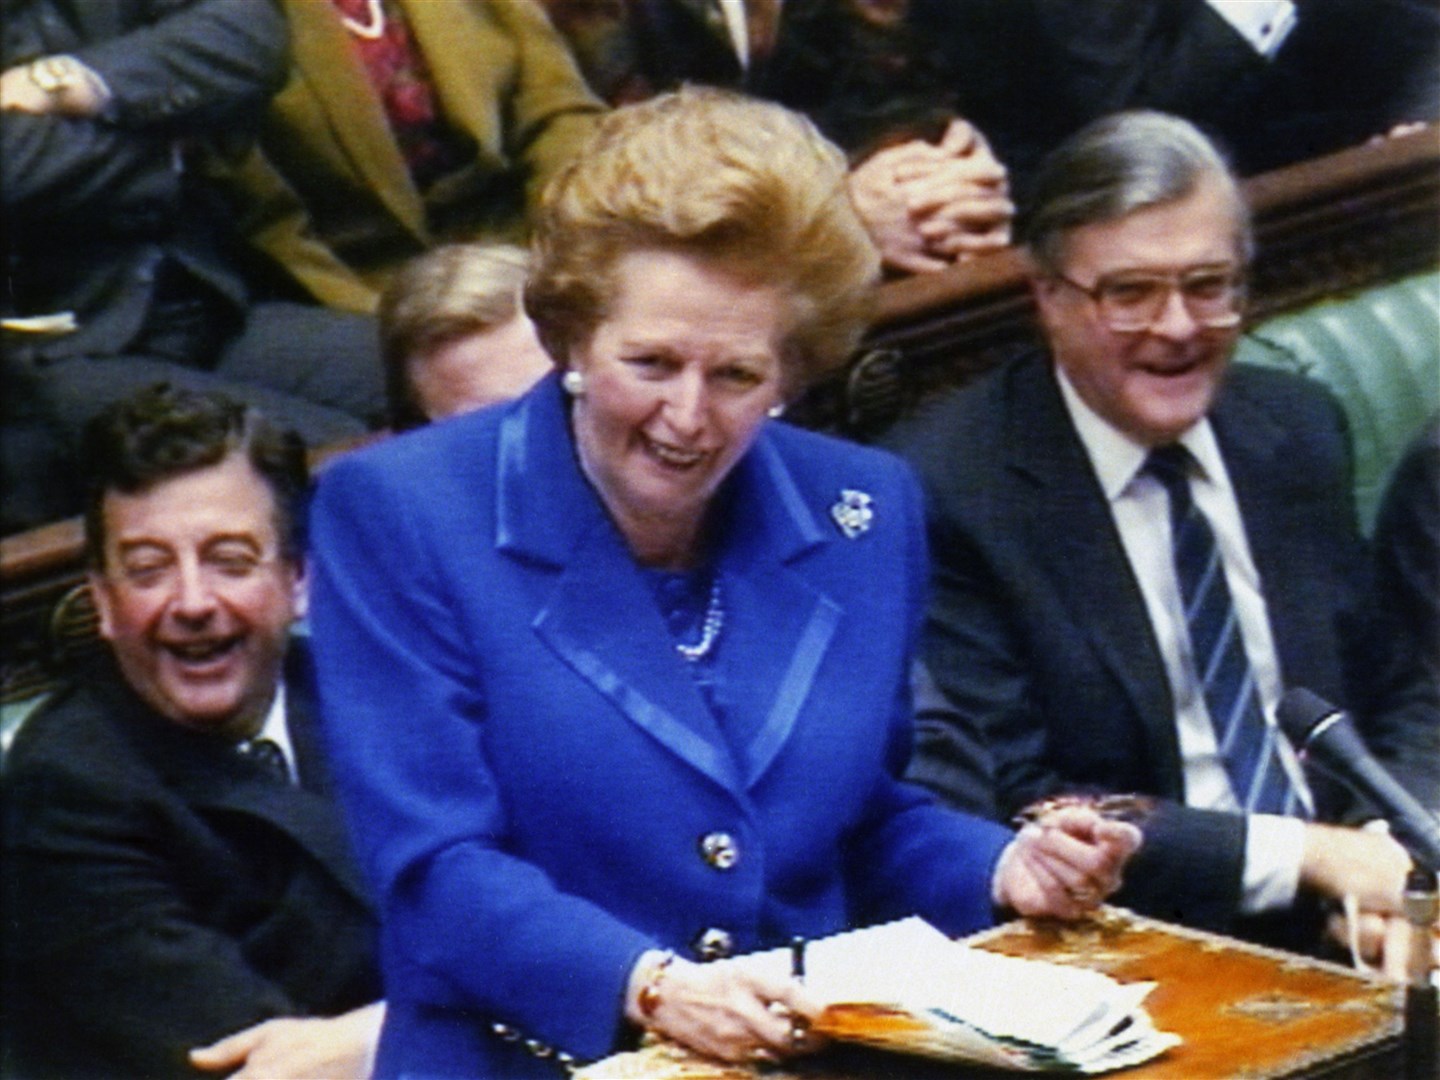 Then-prime minister Margaret Thatcher speaking in the House of Commons (PA Archive/PA Images)